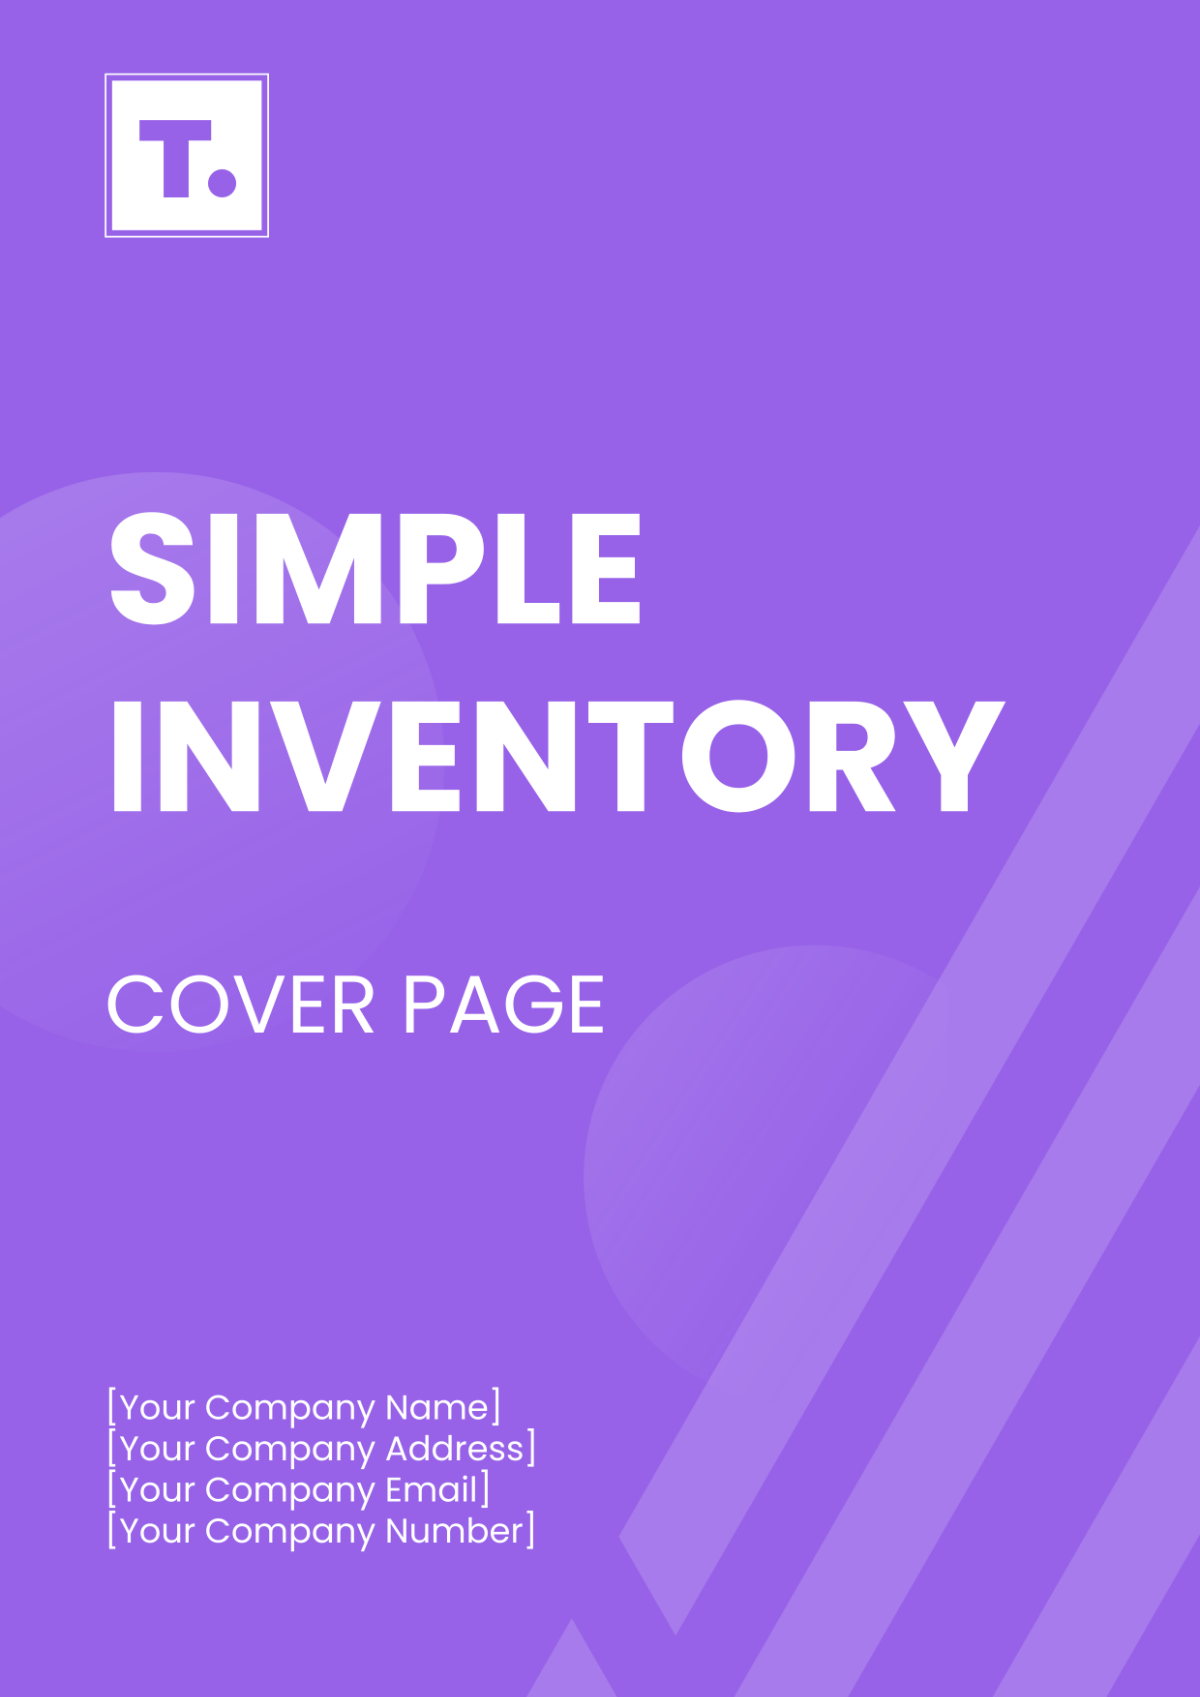 Simple Inventory Cover Page